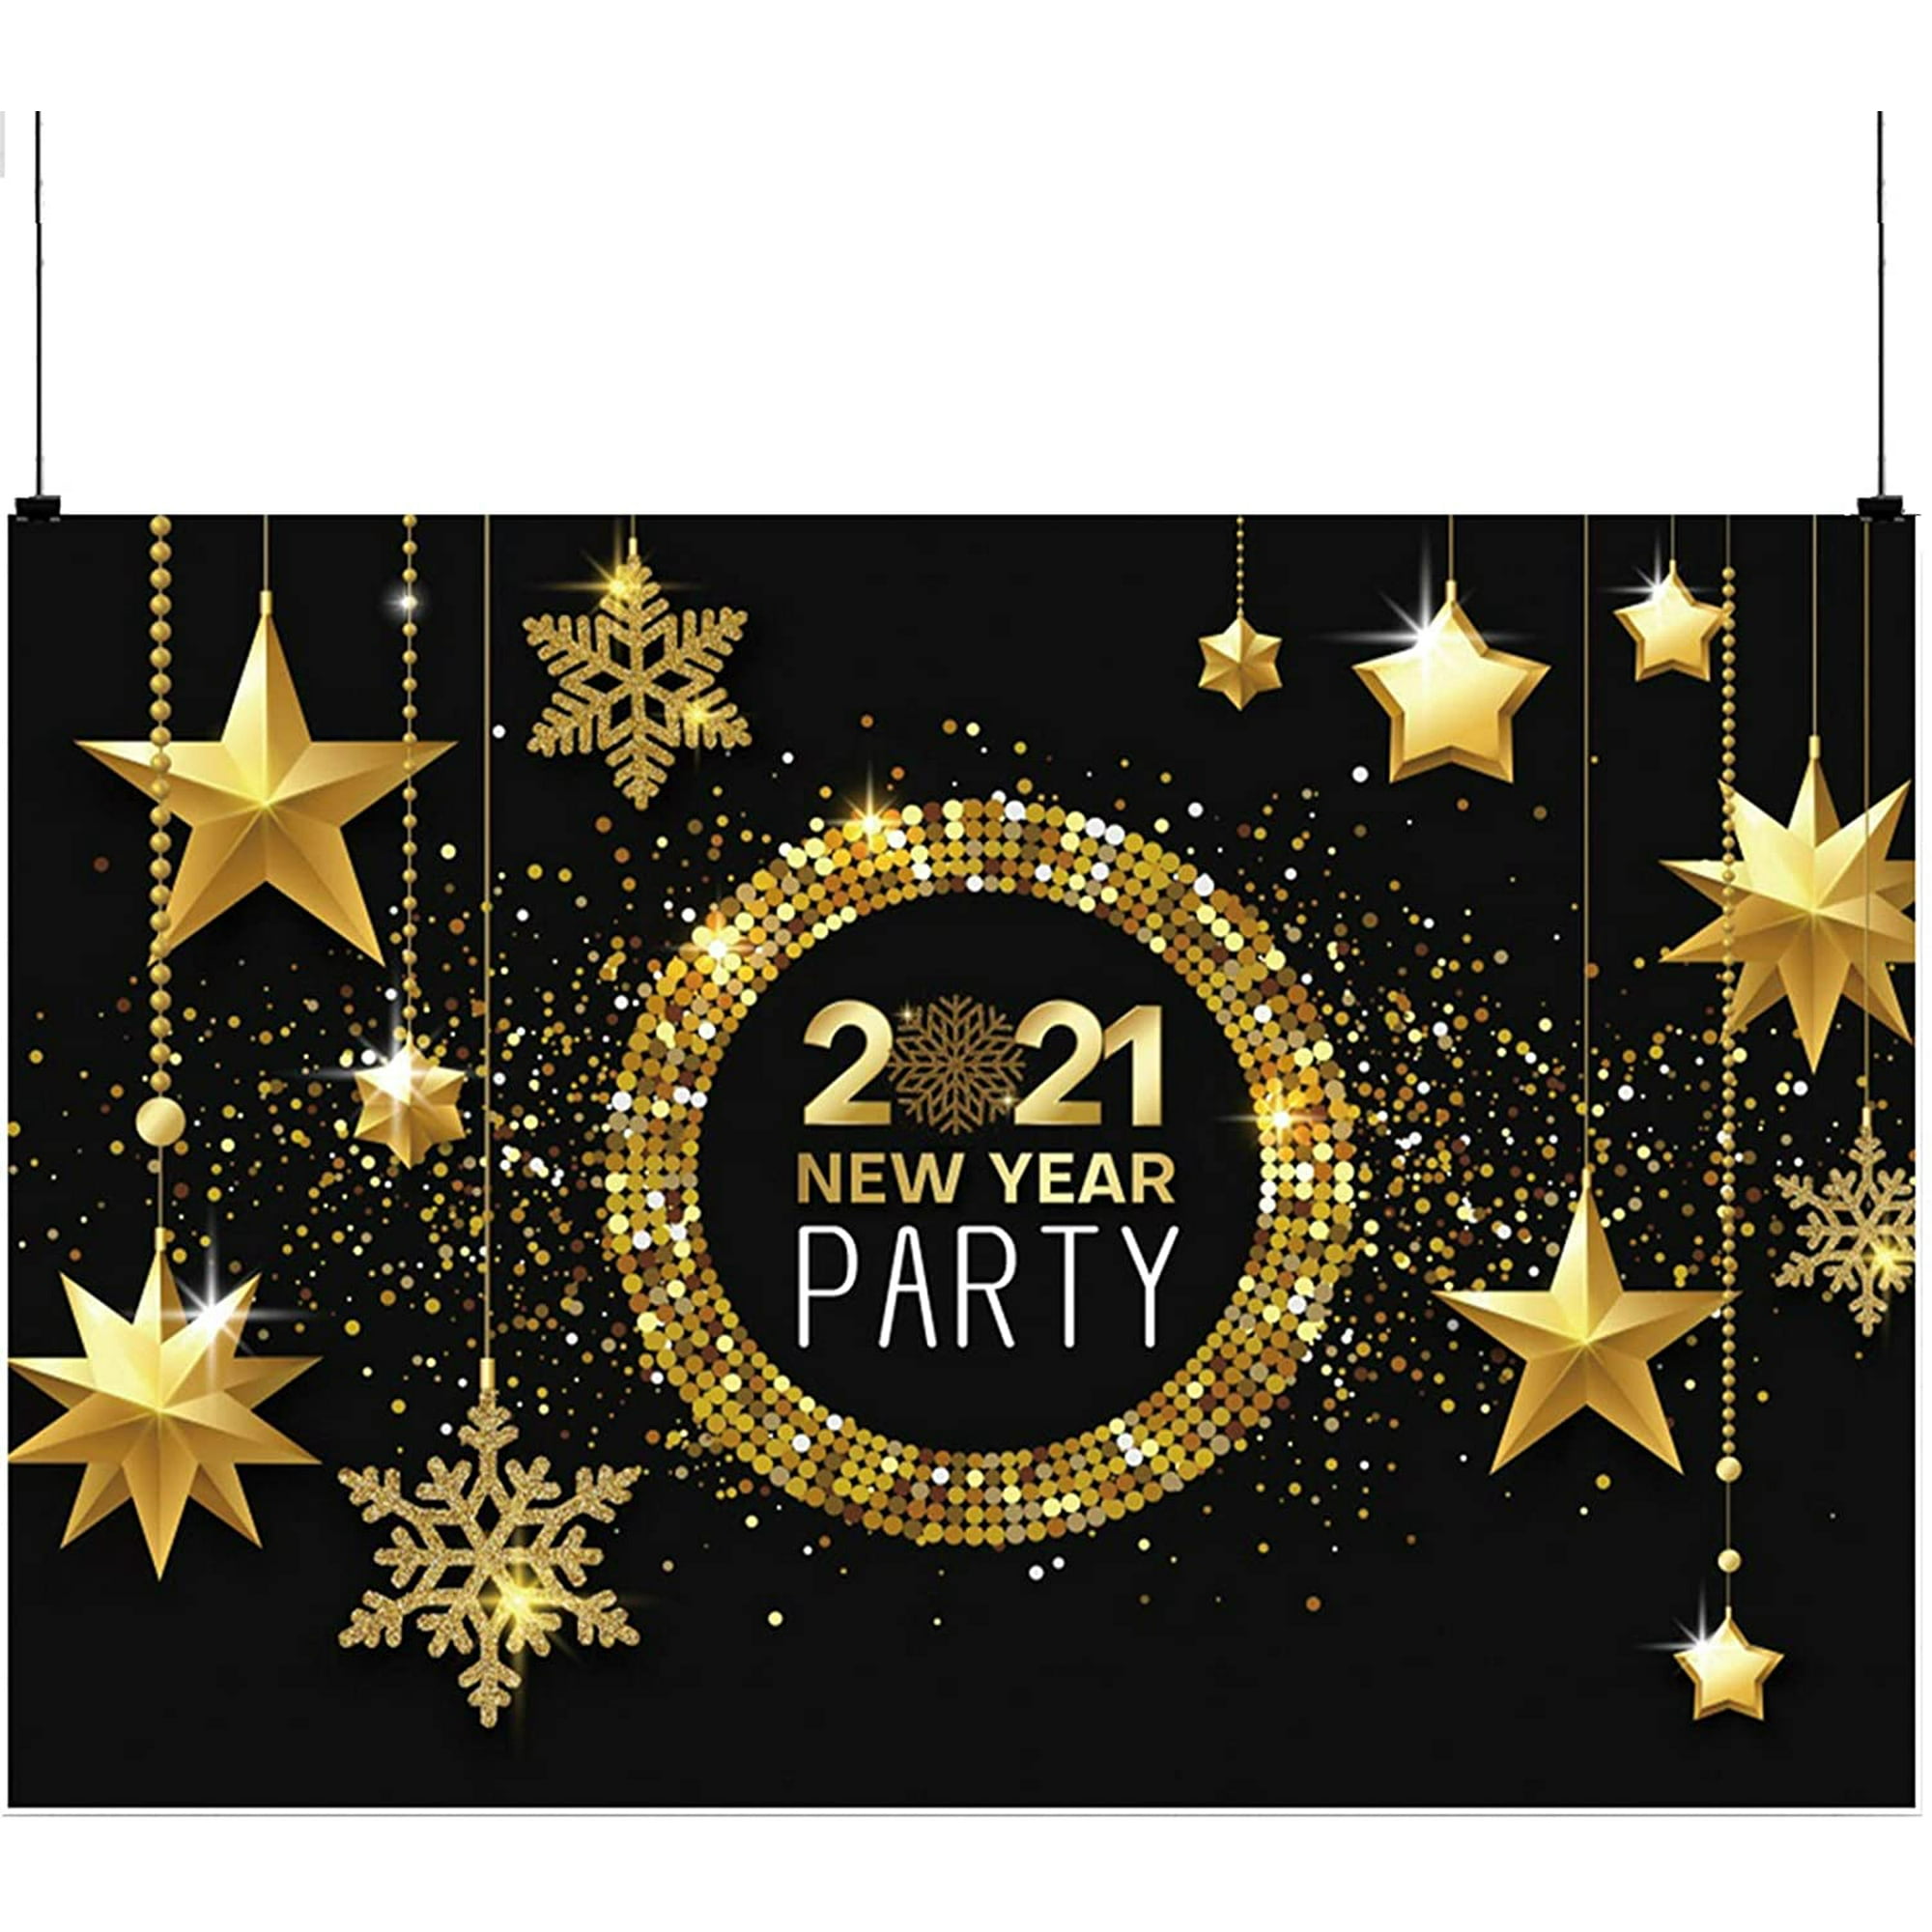 SAVITA 6x4ft 2021 New Year Photography Backdrop, Black Gold Glitter Star  Vinyl Photo Booth Background Banner for New | Walmart Canada